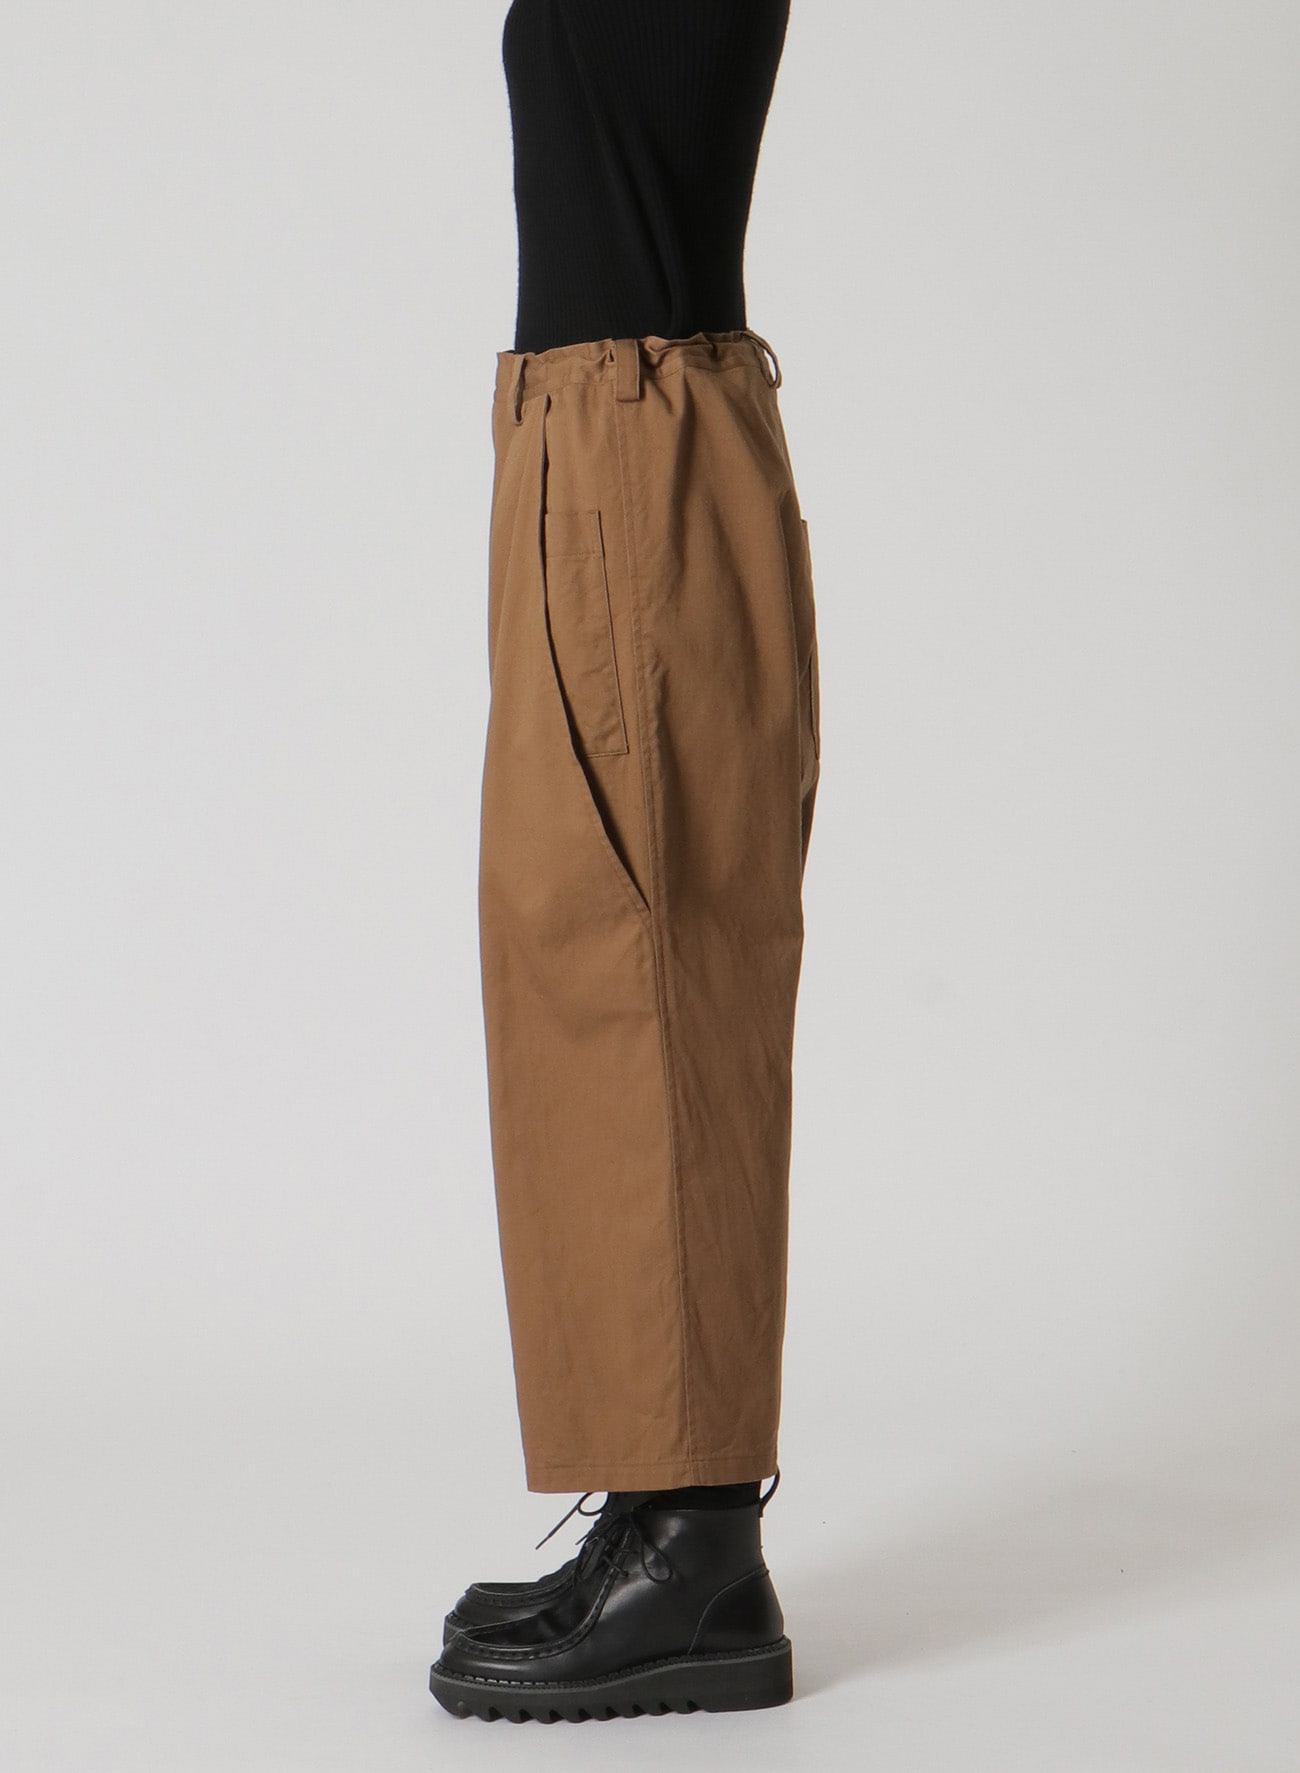 [Y's BORN PRODUCT] COTTON TWILL LONG POCKET PANTS